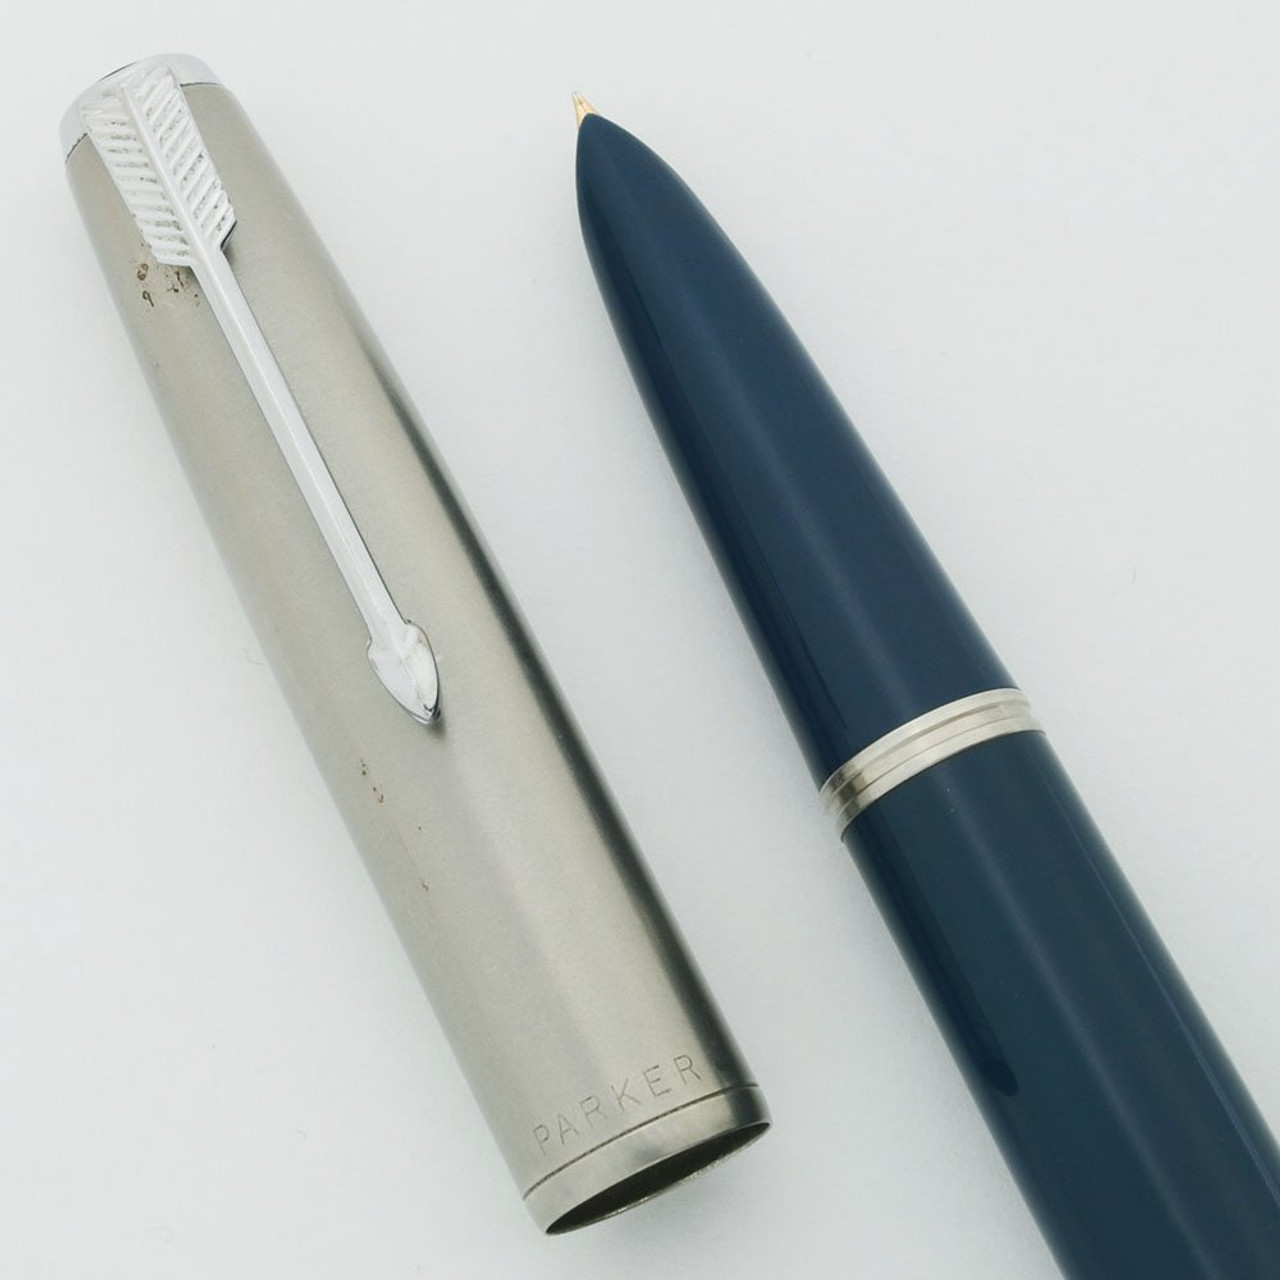 Parker 51 Aerometric Fountain Pen (1950) - Teal Blue, Lustraloy Cap, New Old Stock Fine Nib (Excellent, Works Well)